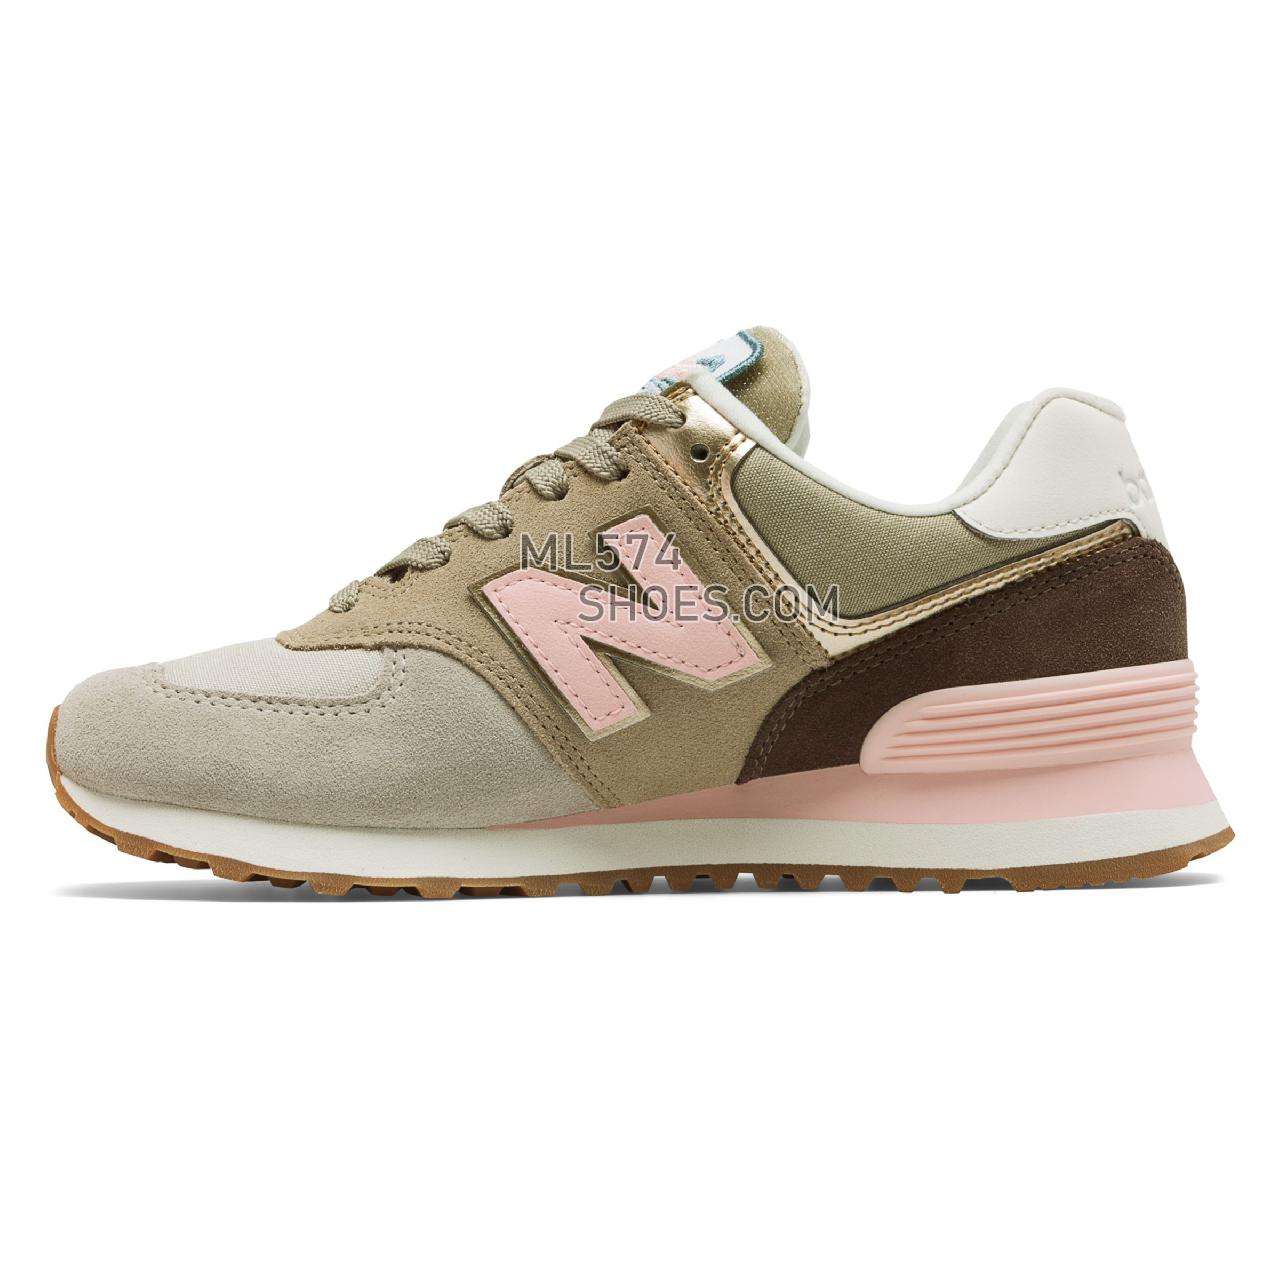 New Balance 574 Metallic Patch - Women's Classic Sneakers - Light Cliff Grey with Light Gold - WL574MLA